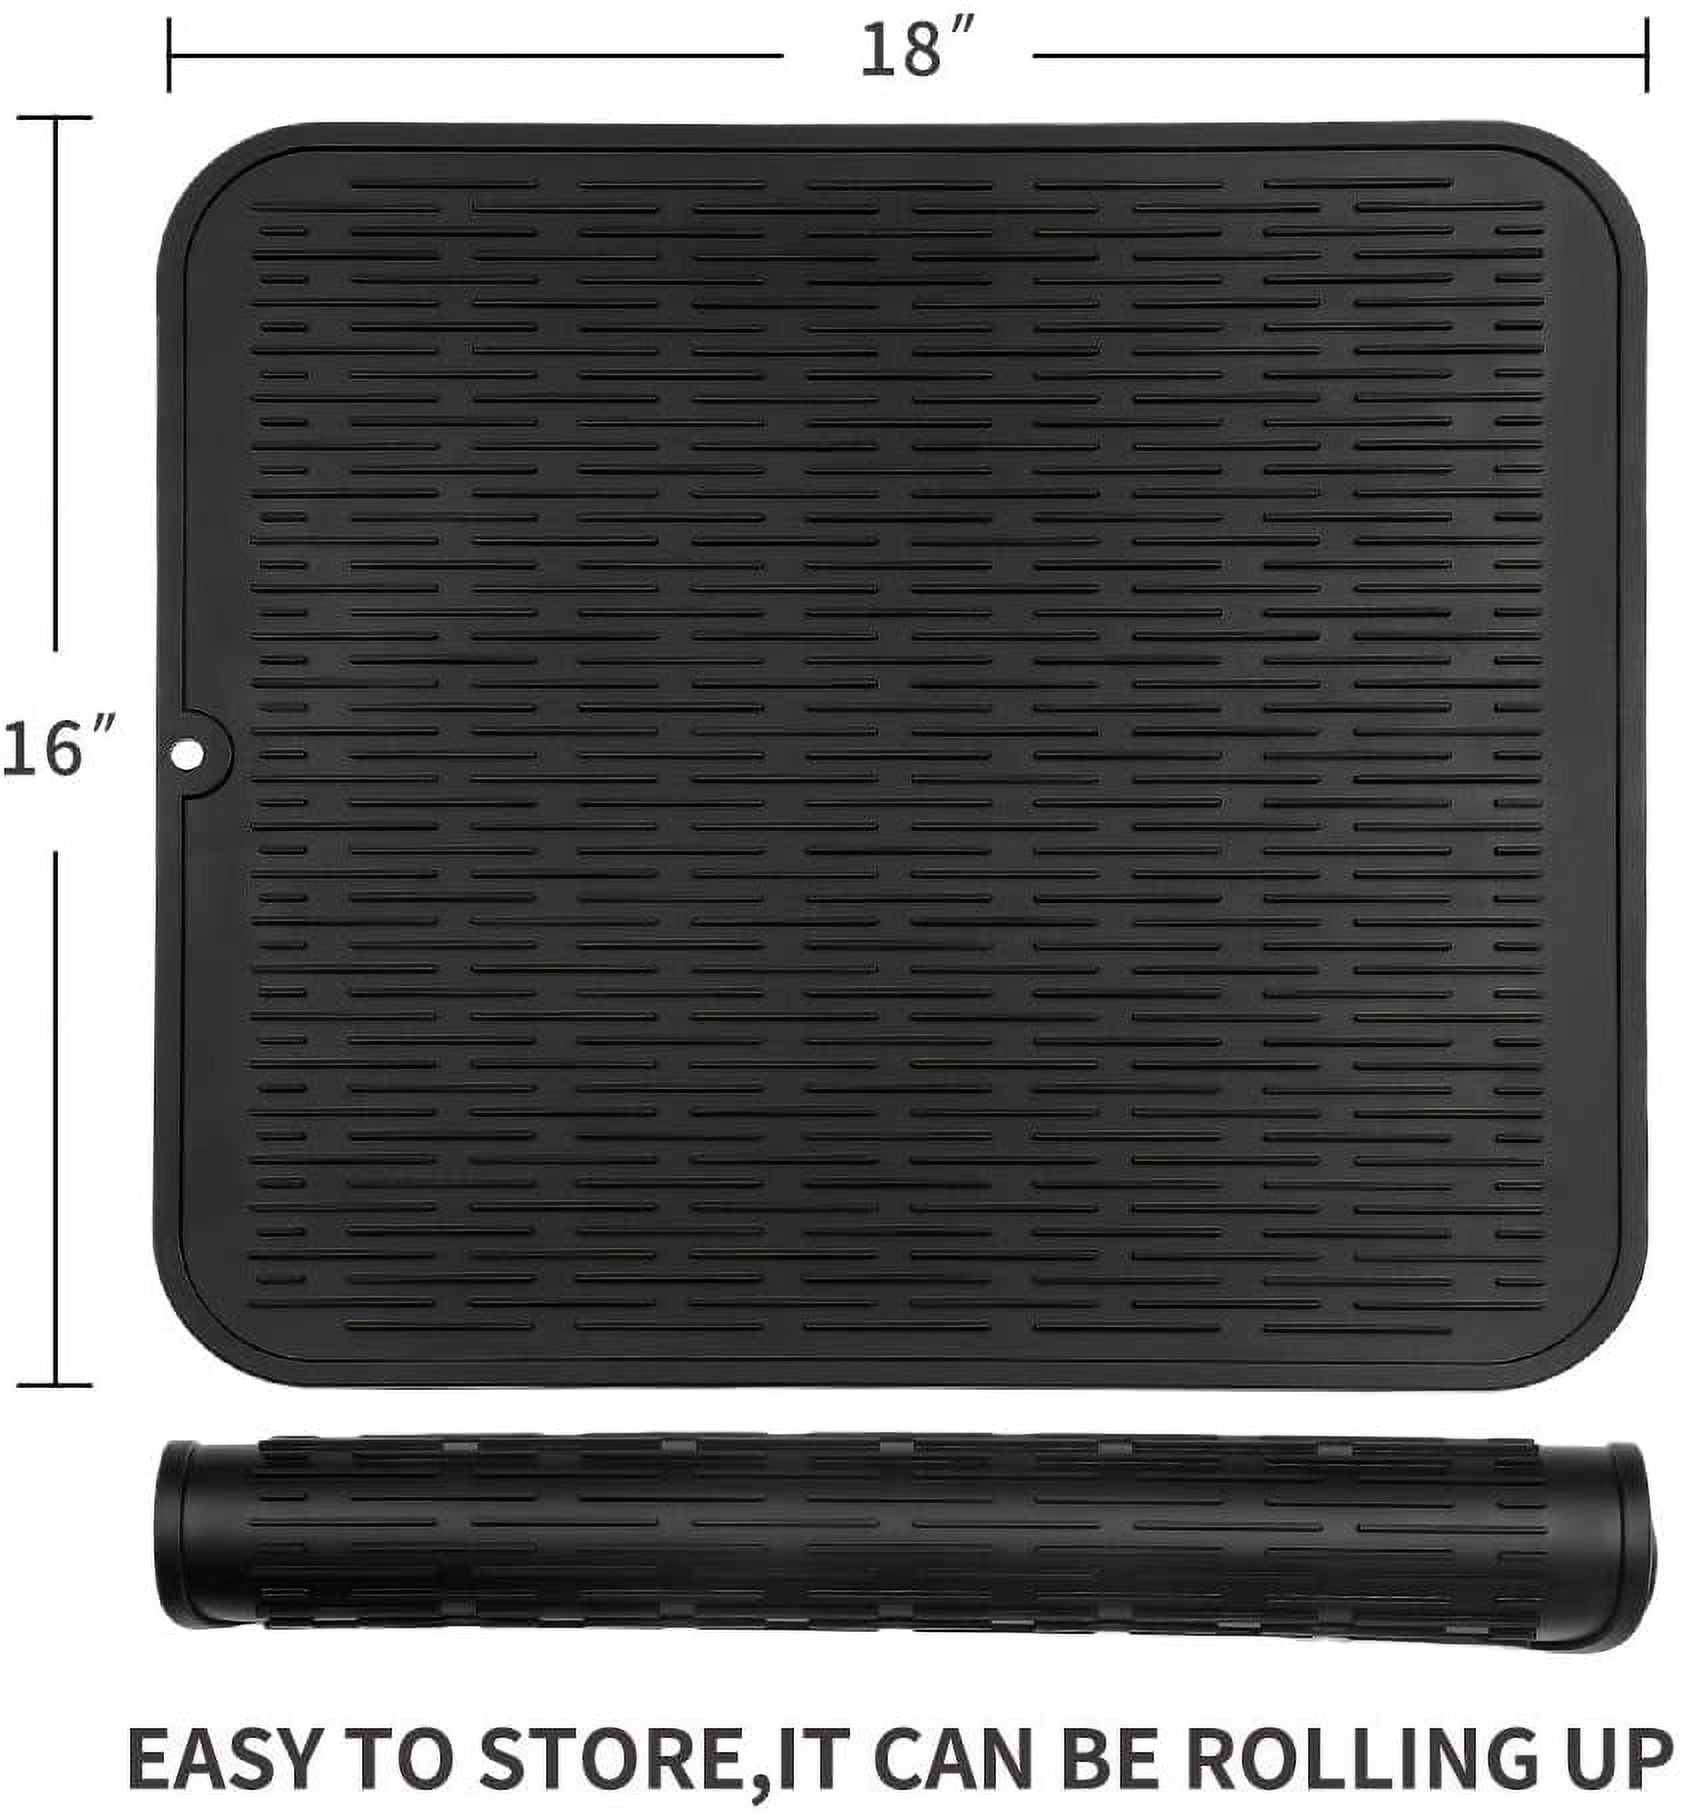 Comfy Grip Rectangle Black Silicone Dish Drying Mat - 15 3/4 x 11